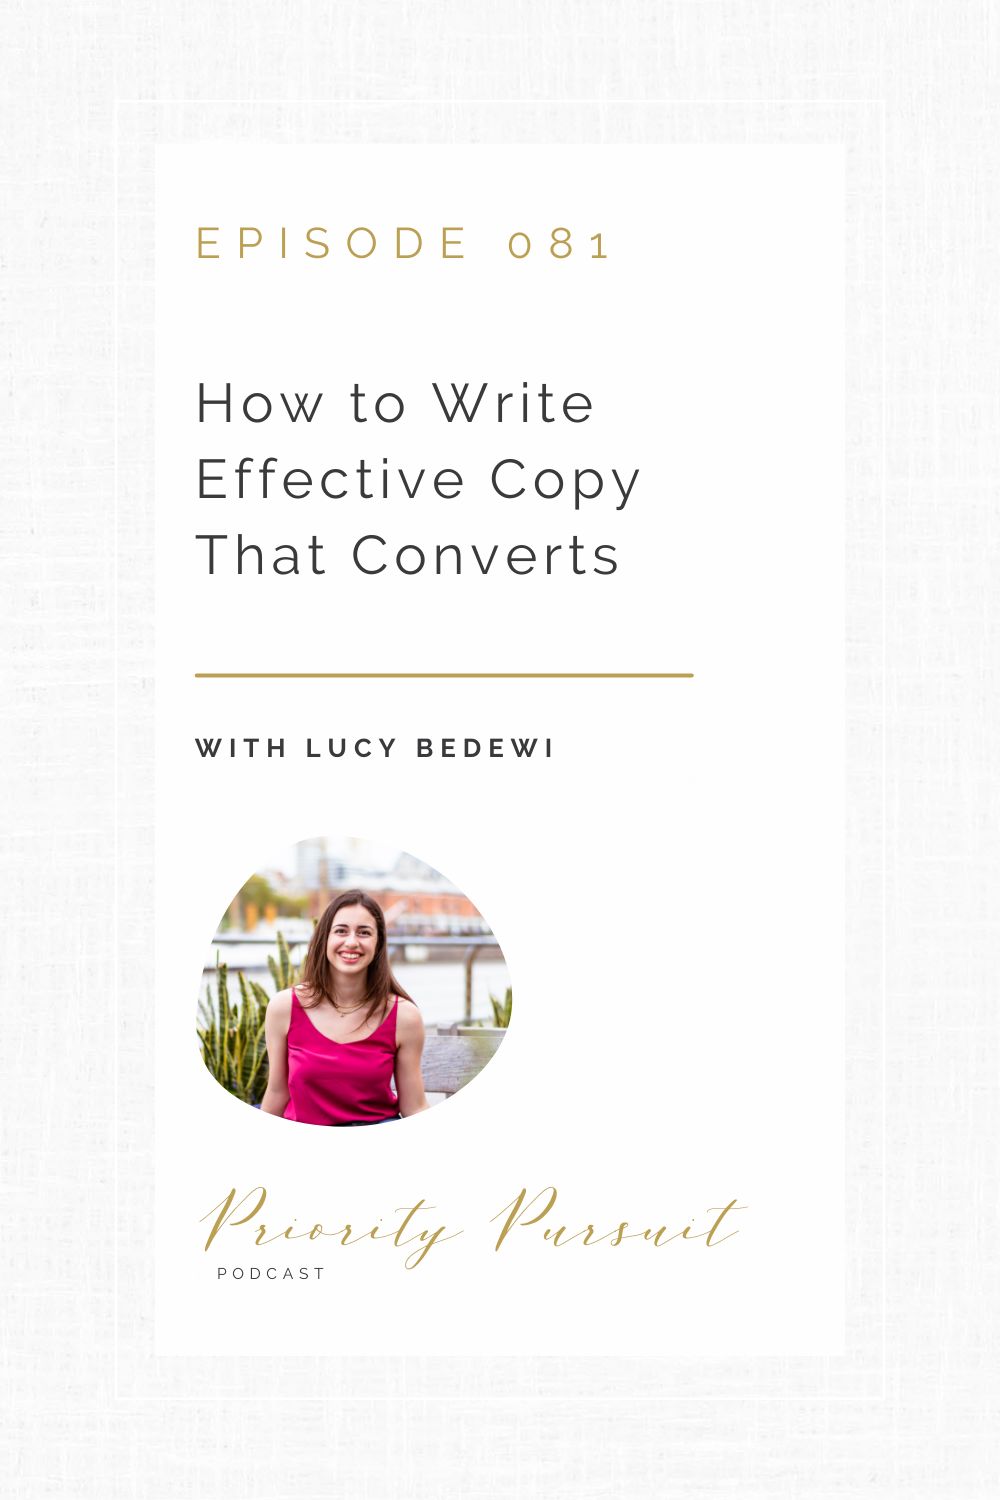 Victoria Rayburn and Lucy Bedewi discuss how creative entrepreneurs can write effective copy that converts.